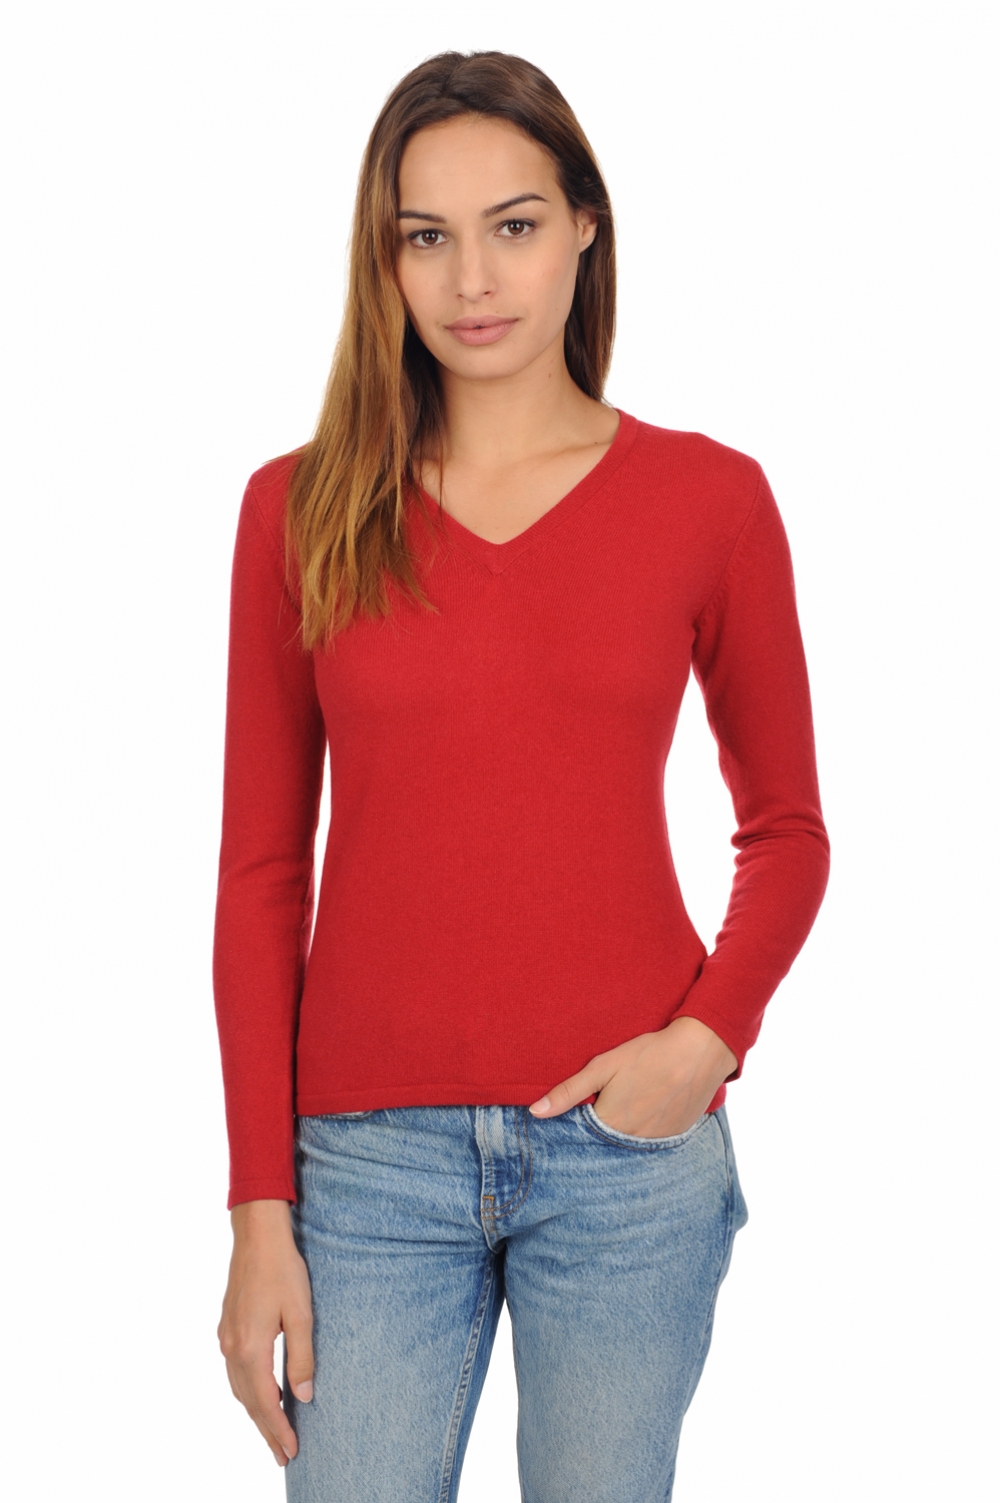 Cashmere ladies spring summer collection emma blood red 3xl